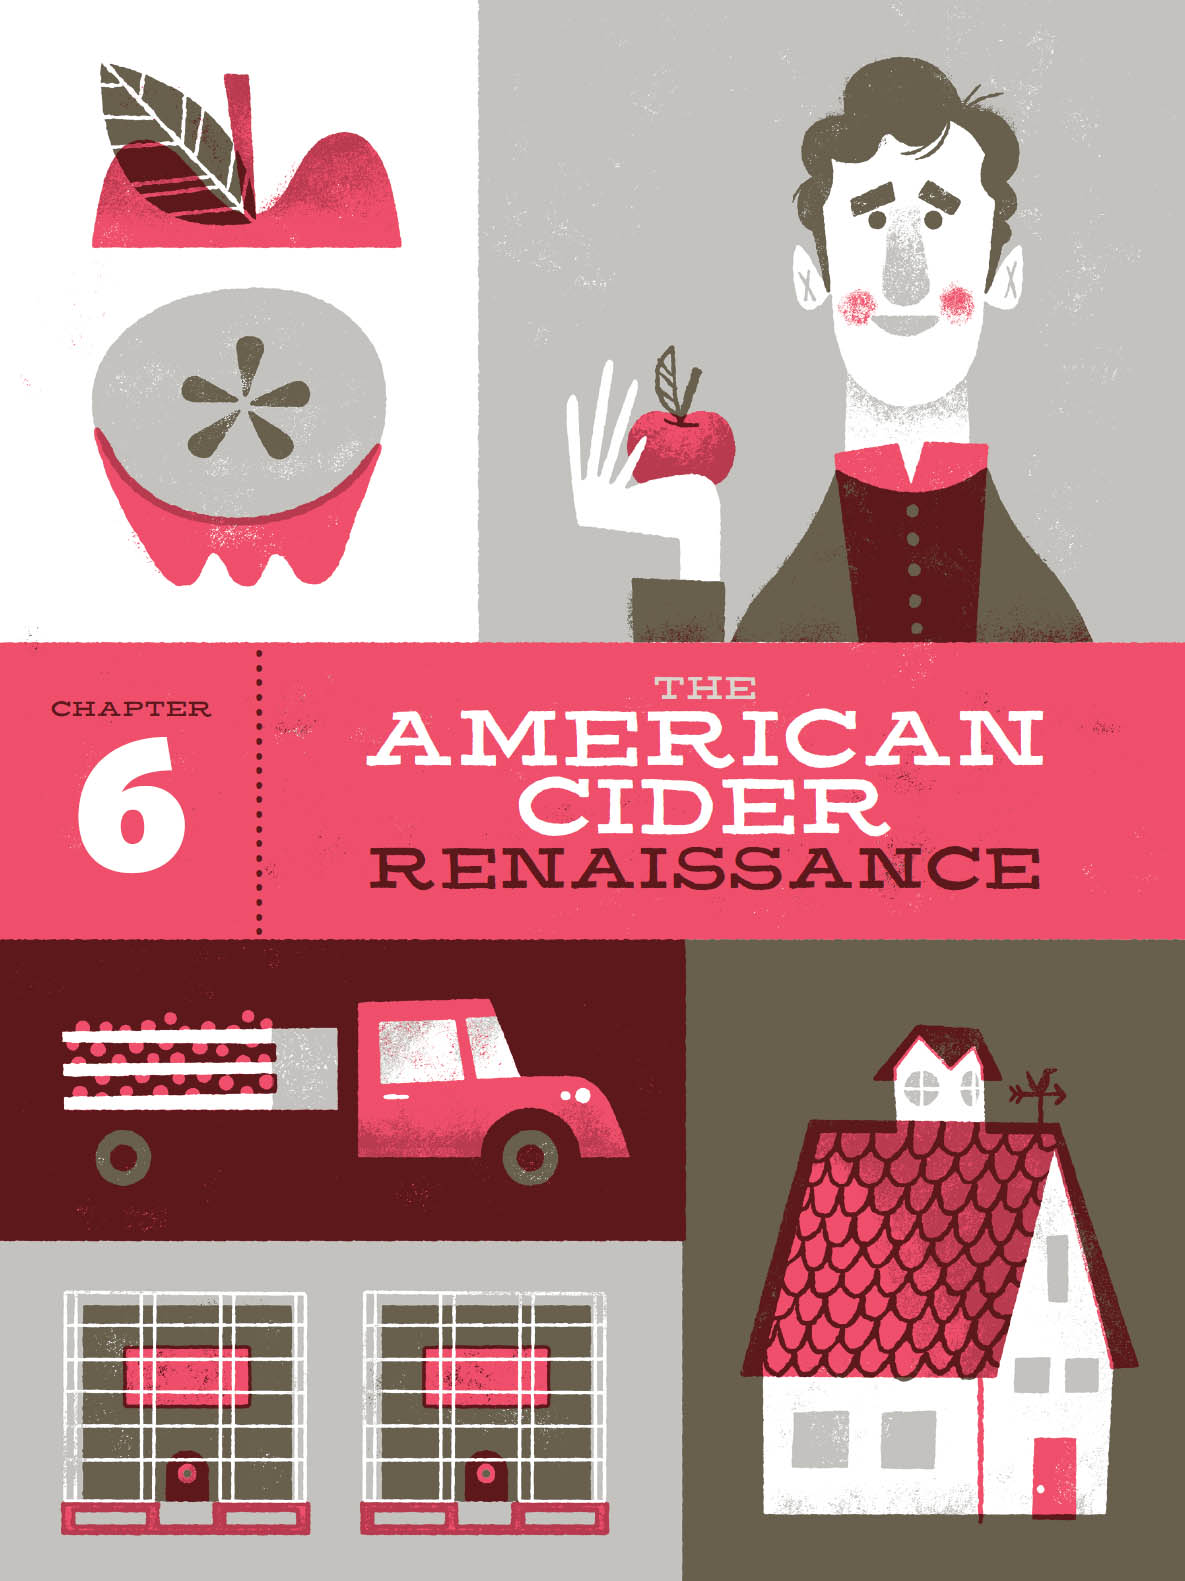 CHAPTER 6 THE AMERICAN CIDER RENAISSANCE